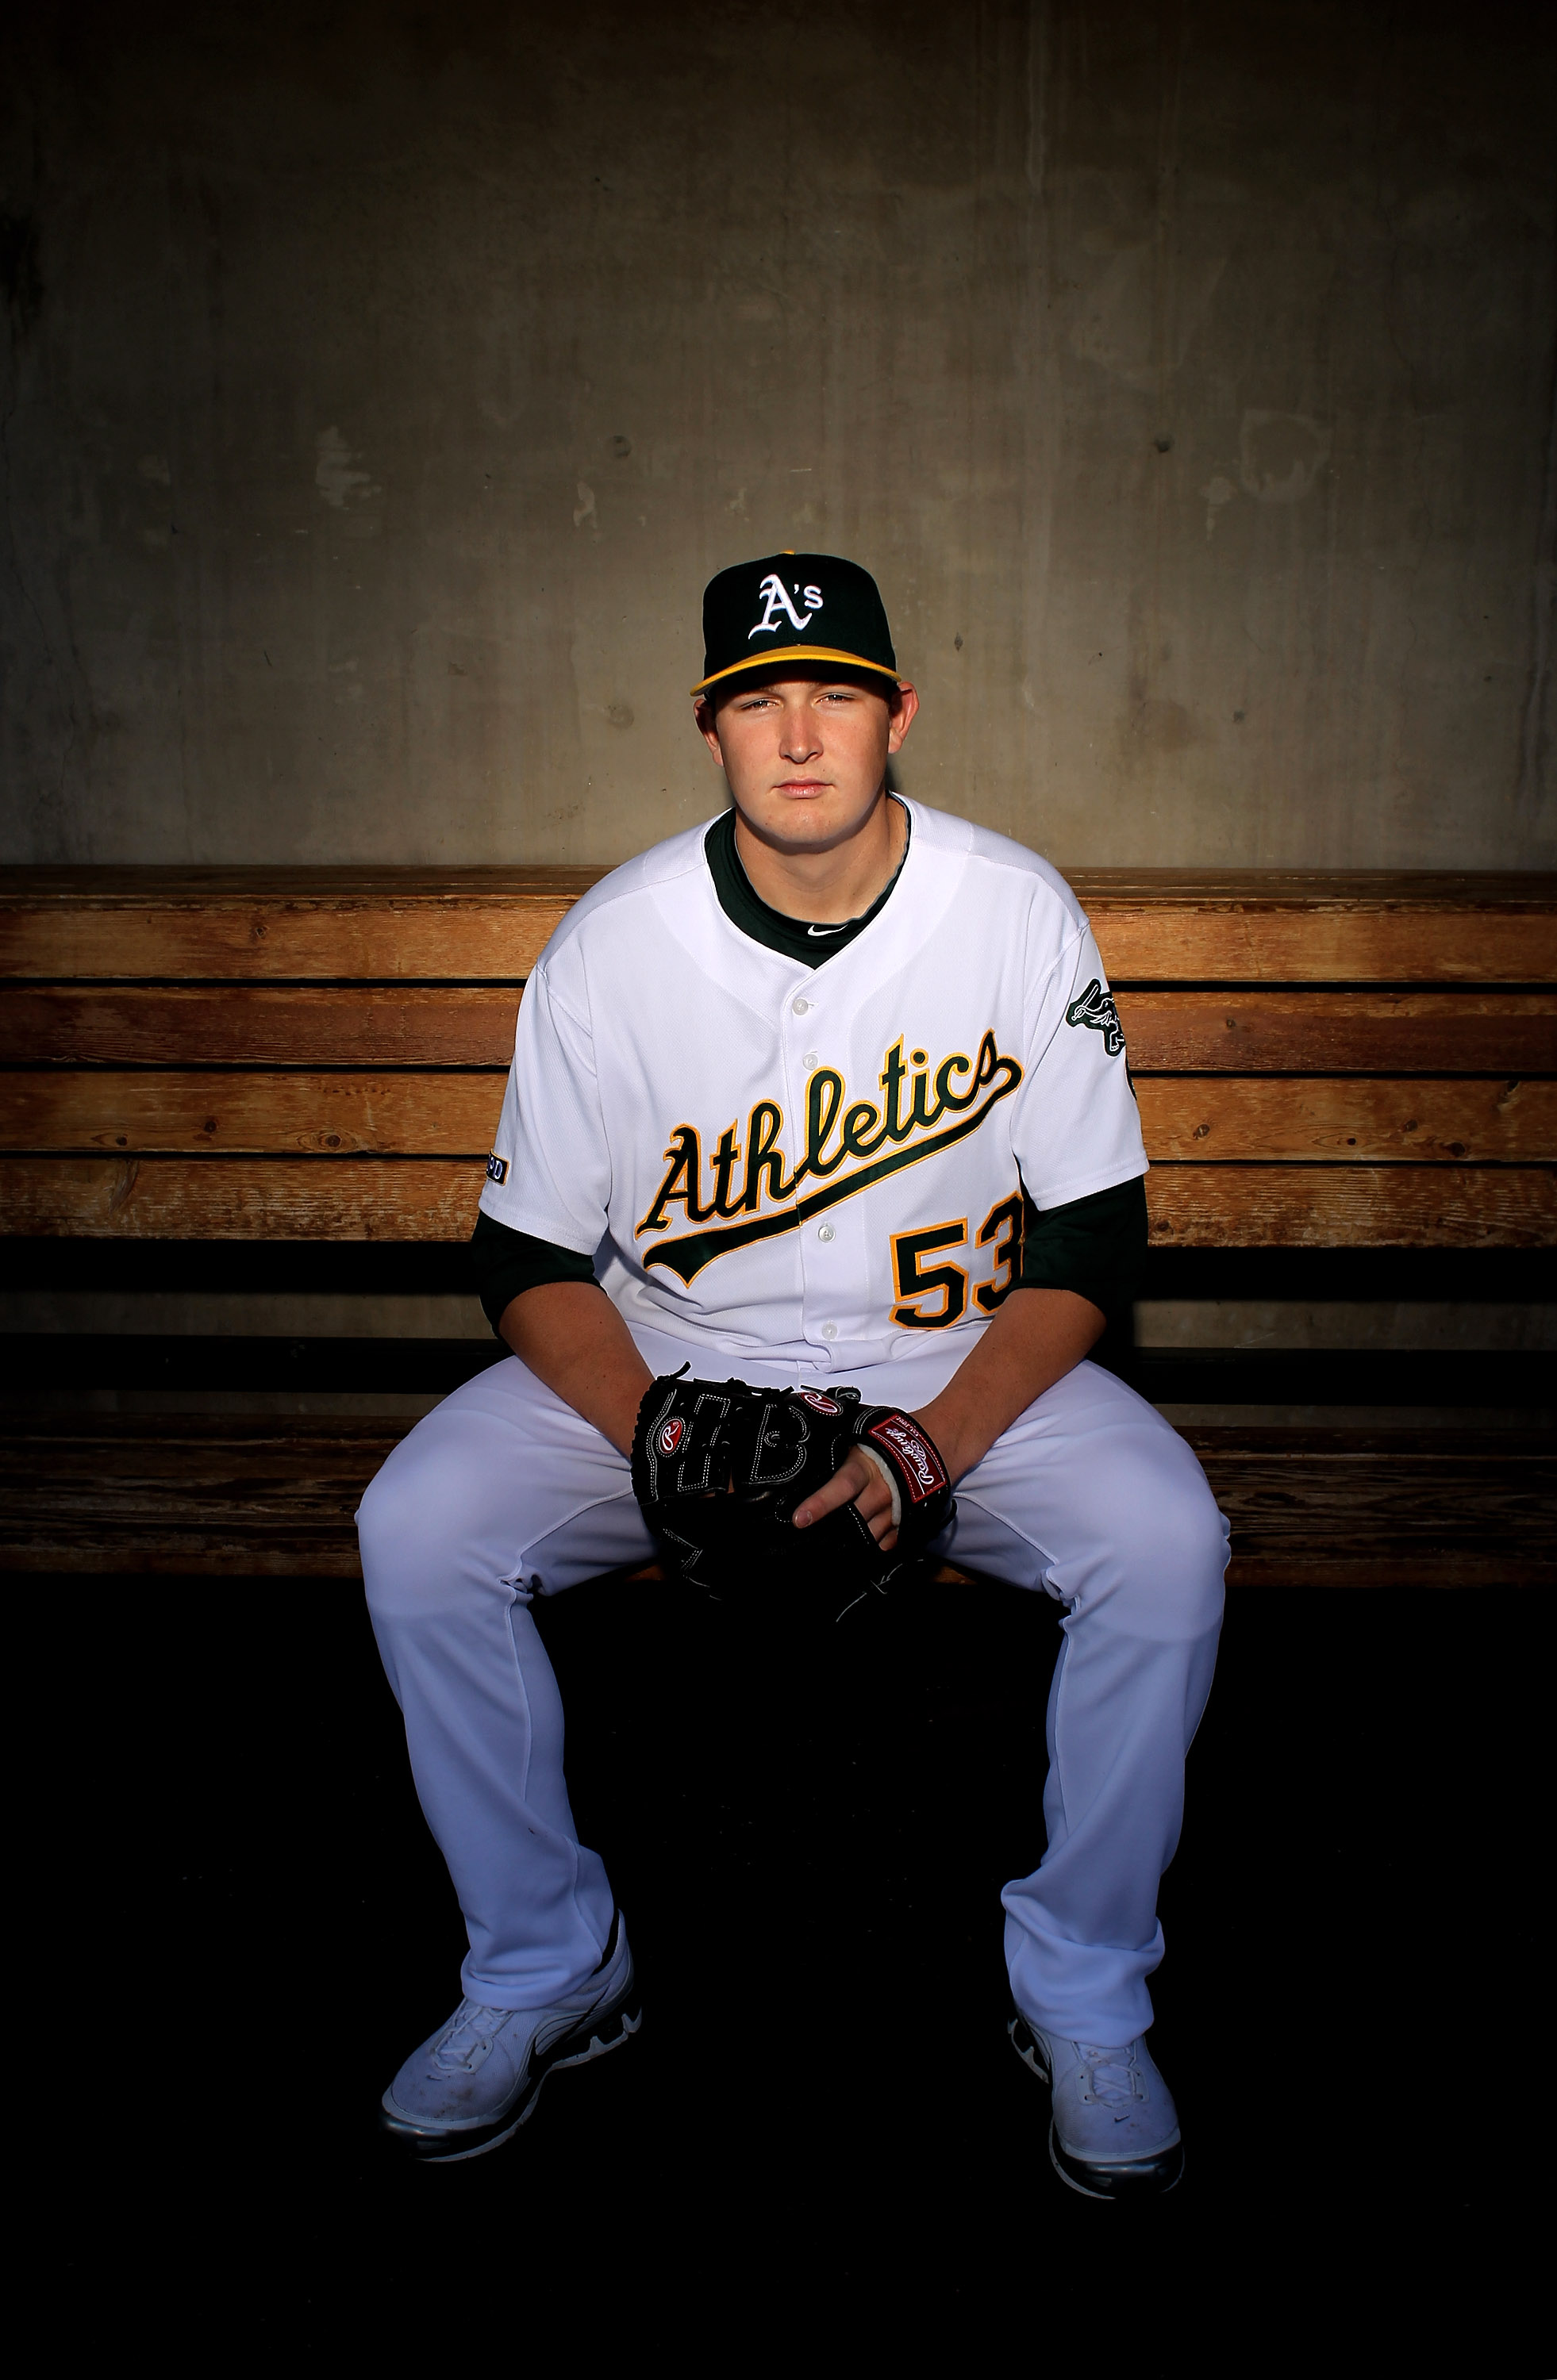 PHOENIX - MARCH 01:  Trevor Cahill of the Oakland Athletics poses during photo media day at the Athletics spring training complex on March 1, 2010 in Phoenix, Arizona.  (Photo by Ezra Shaw/Getty Images)